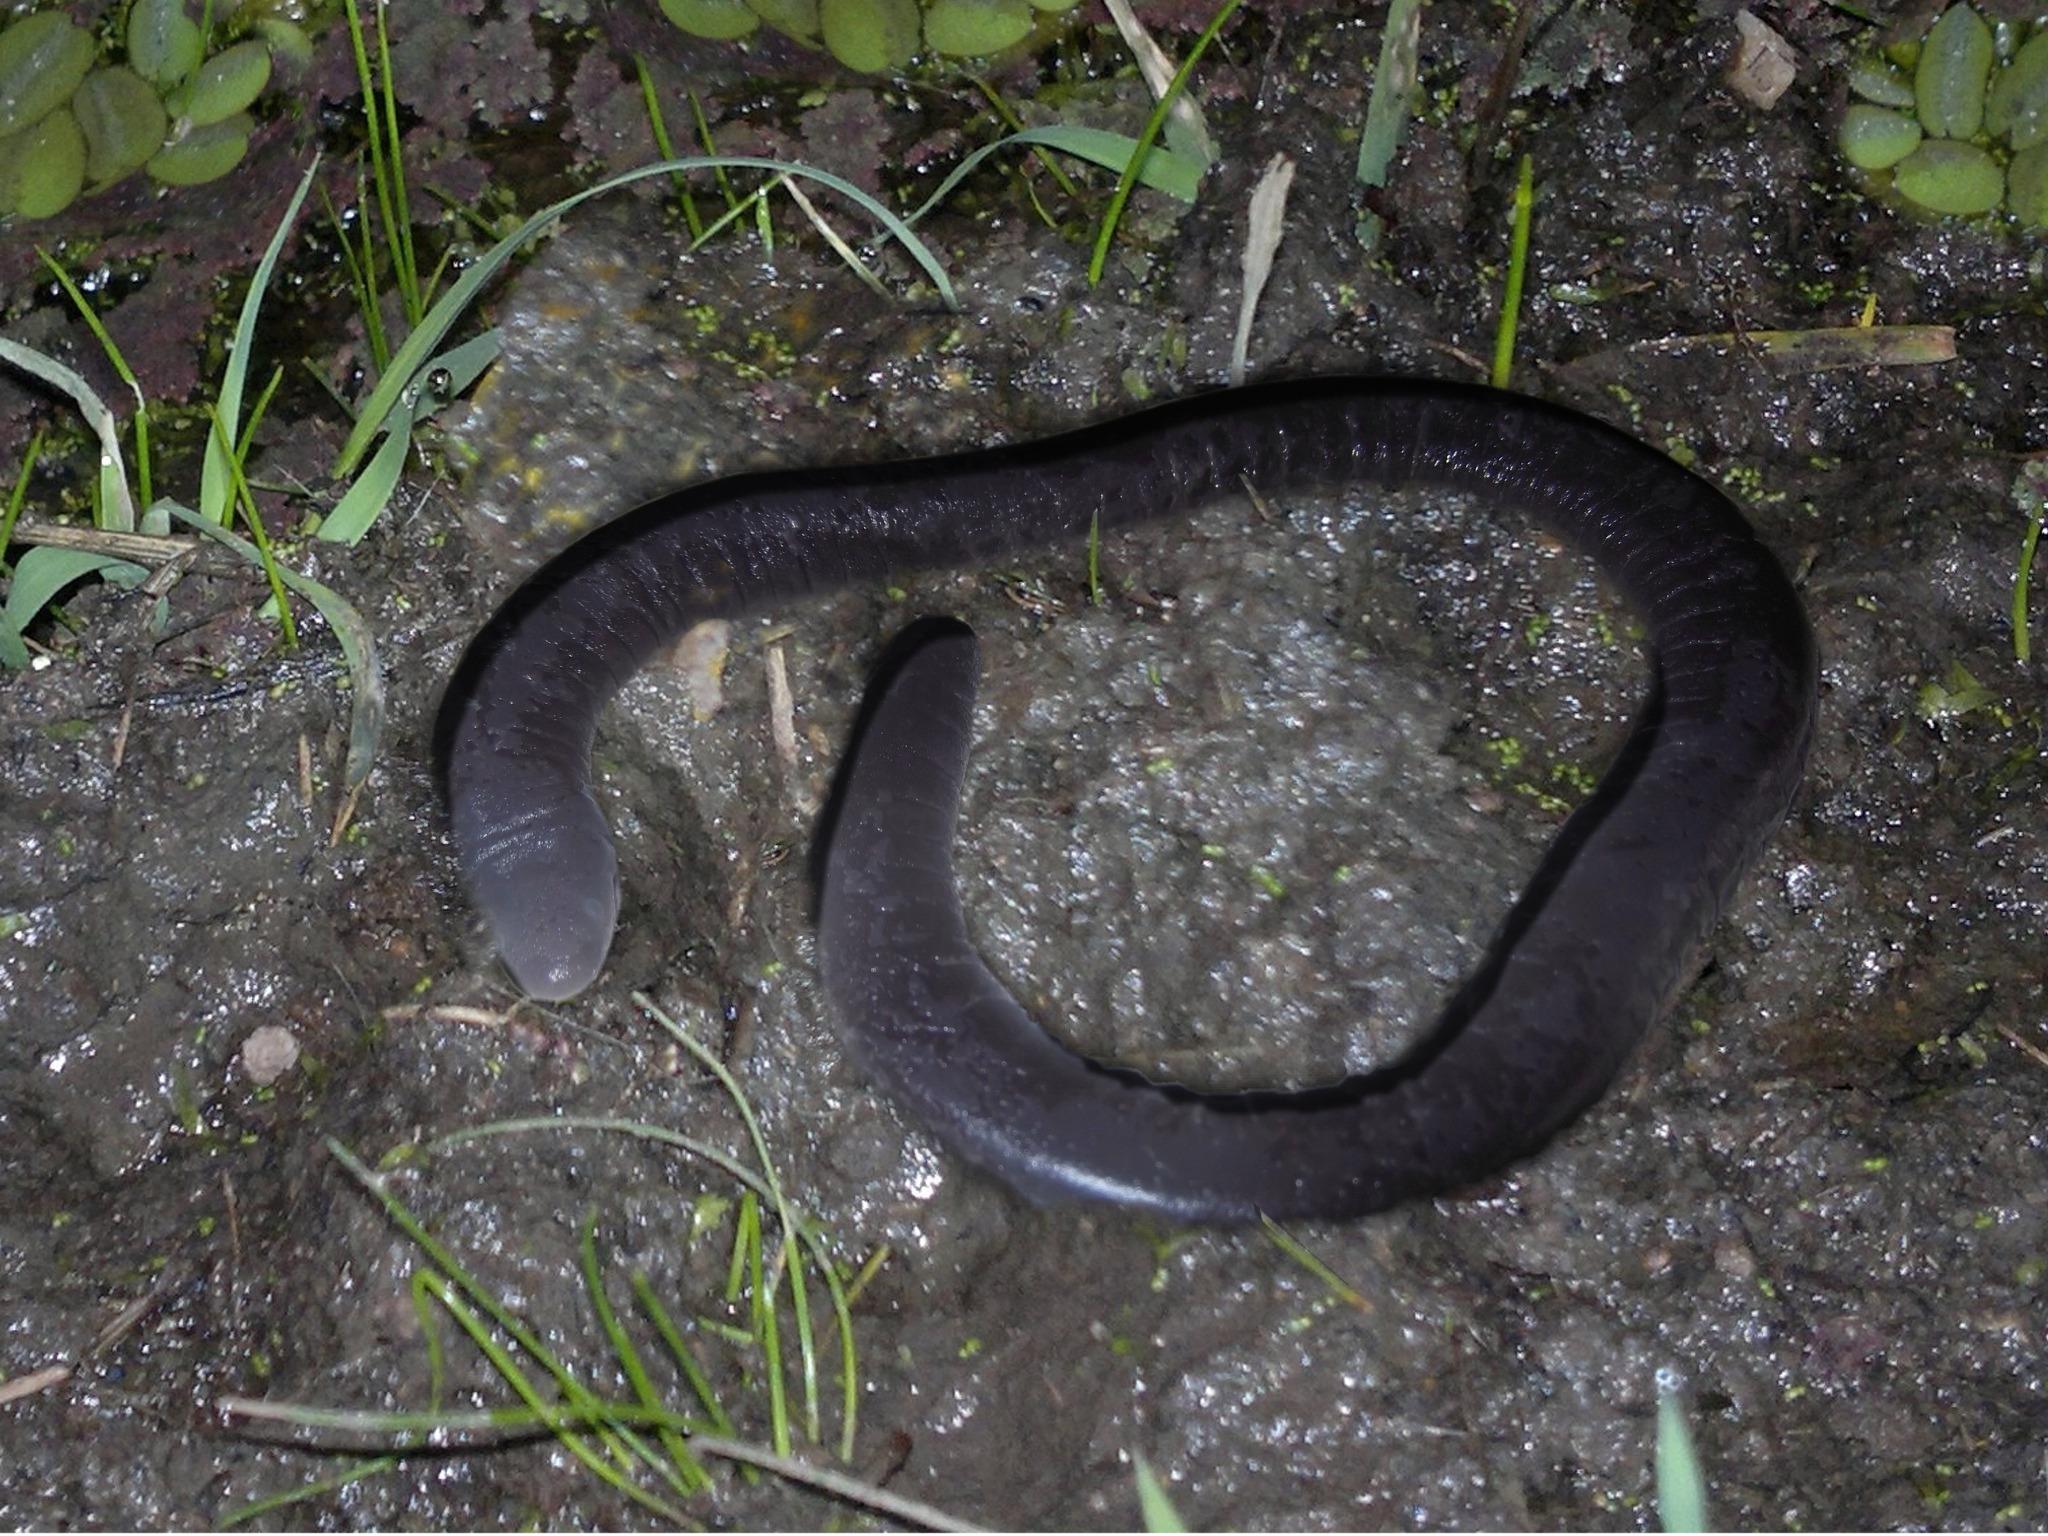 Peters' caecilians of Life